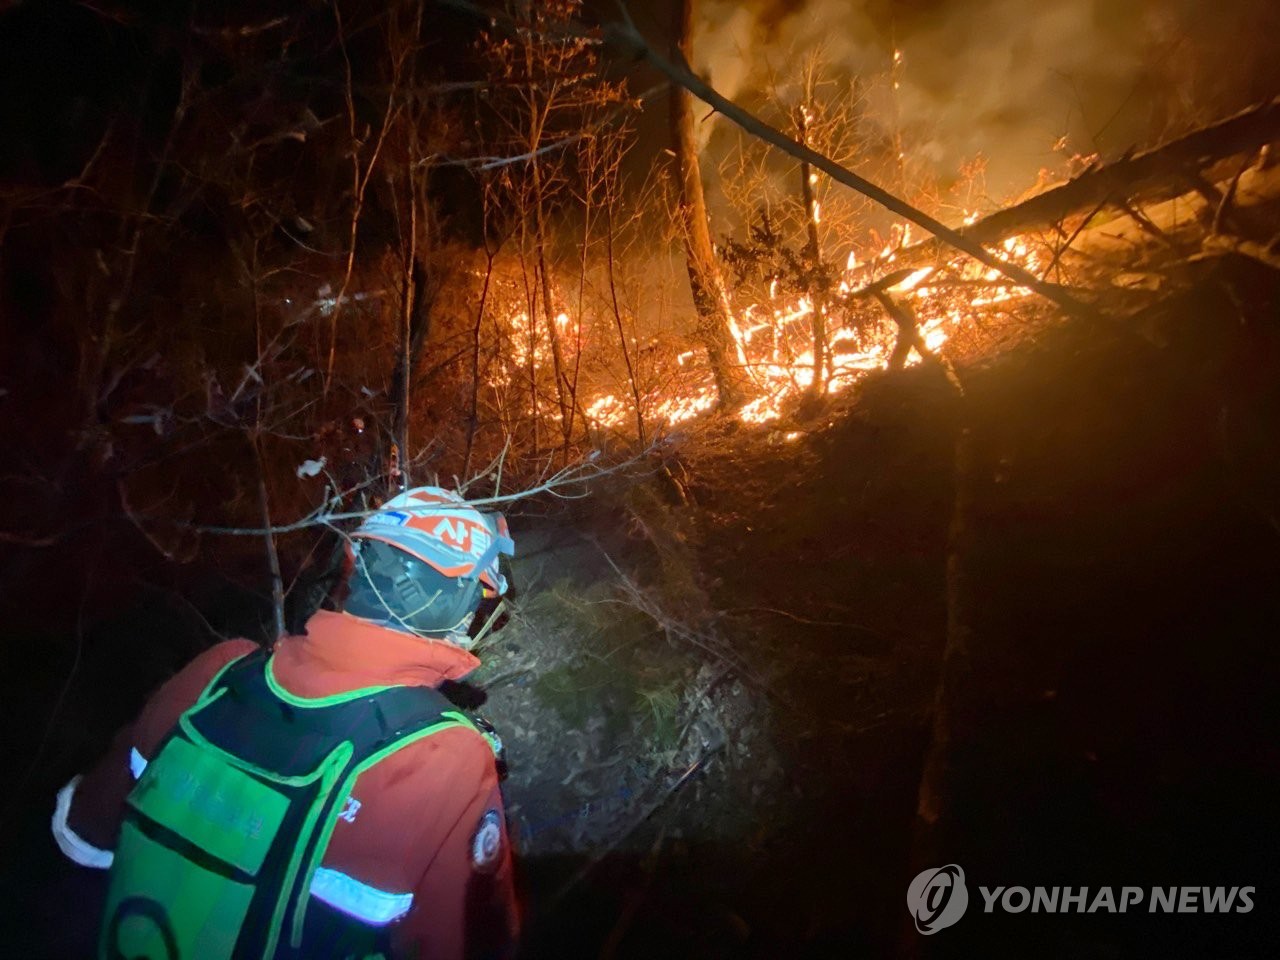 A firefighter conducts operations to extinguish a forest fire in Jeongseon, some 210 kilometers east of Seoul, on Feb. 20, 2021, in this photo provided by the Korea Forest Service. (PHOTO NOT FOR SALE) (Yonhap)